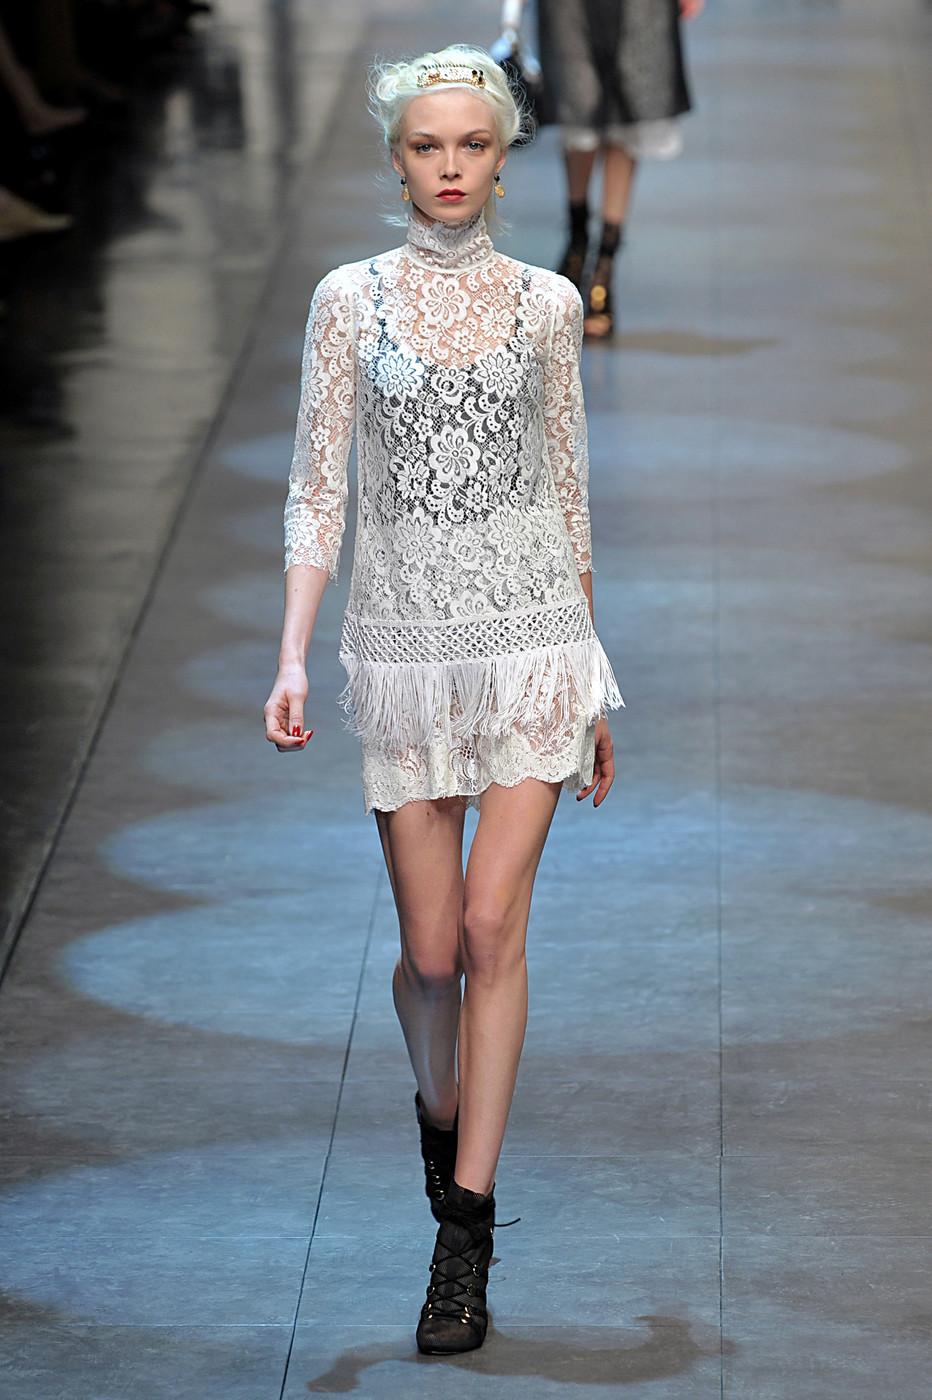 The Runway Dolce & Gabbana SS 2010 lace top with fringes is a beautiful and stylish piece. It features delicate lace fabric with a floral pattern and fringes that add a playful touch. It's a size 42IT or M, and it's in very good condition. Perfect